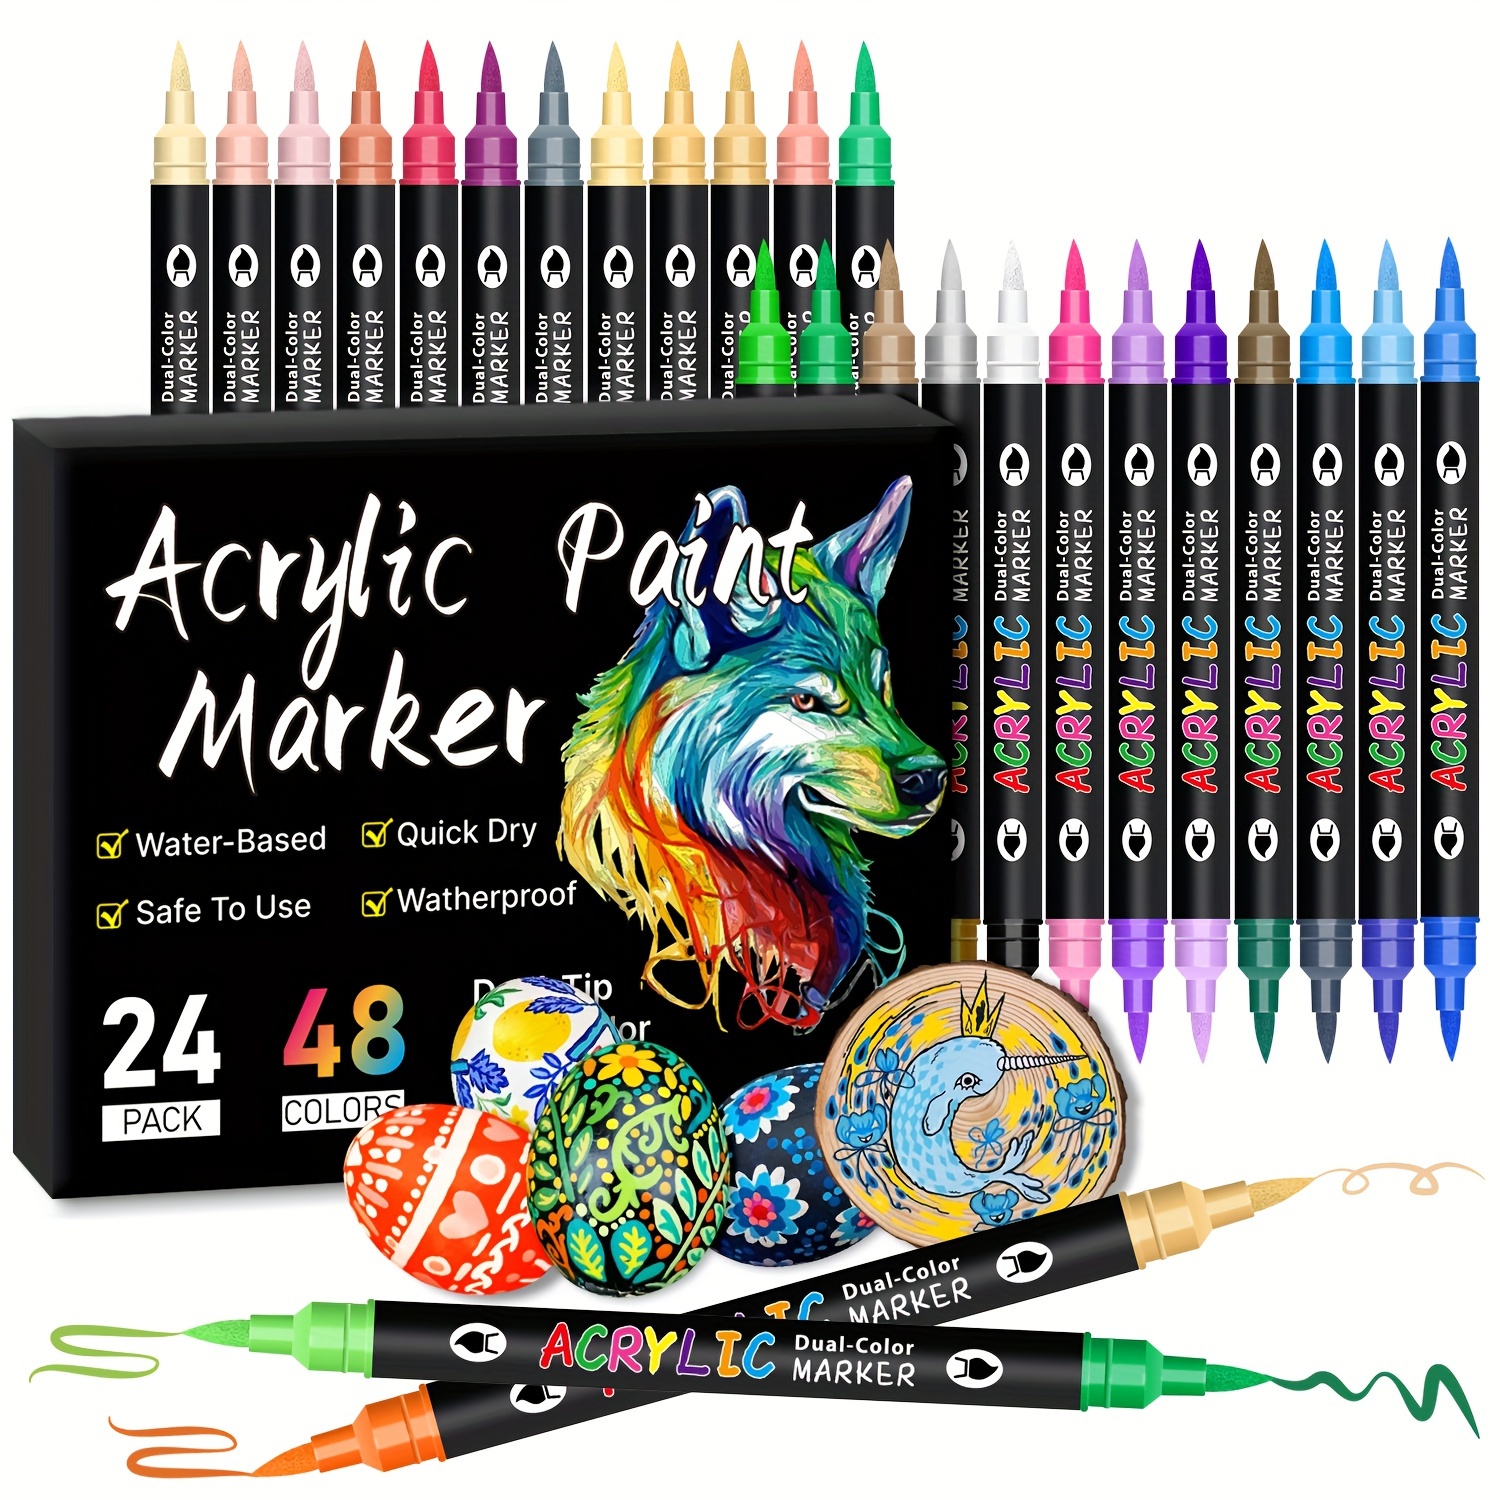 

24-piece Premium Acrylic Paint Markers With Dual-tip Brushes, 48 Vibrant Colors - Ideal For Rock Painting, Canvas, Wood, Ceramics, Glass, Stone, Fabric & Crafts